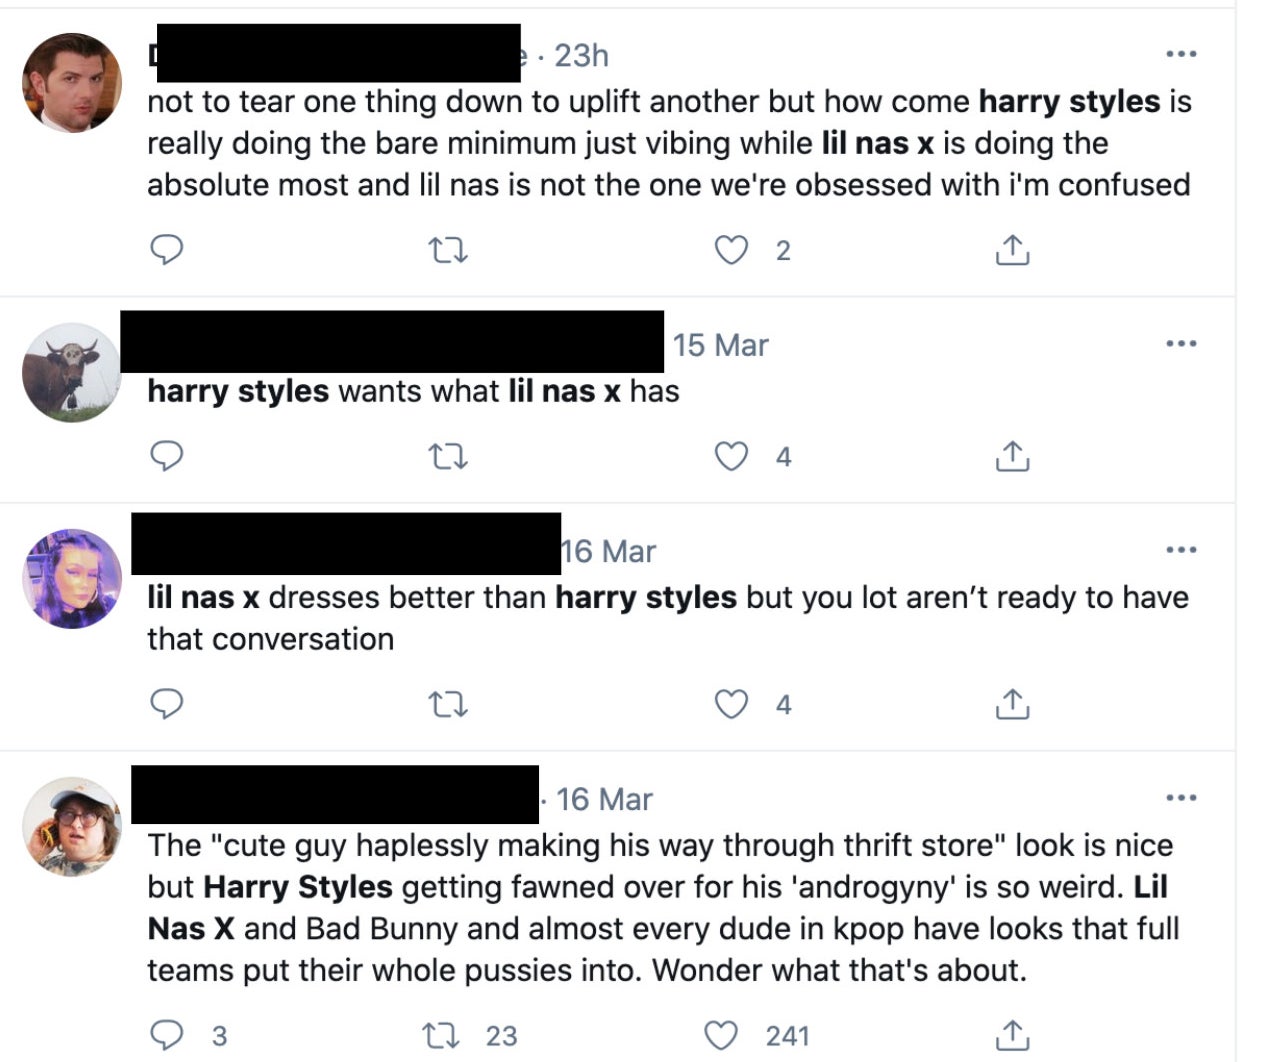 One person commented, &quot;lil nas x dresses better than harry styles but you lot aren&#x27;t ready to have that conversation&quot;